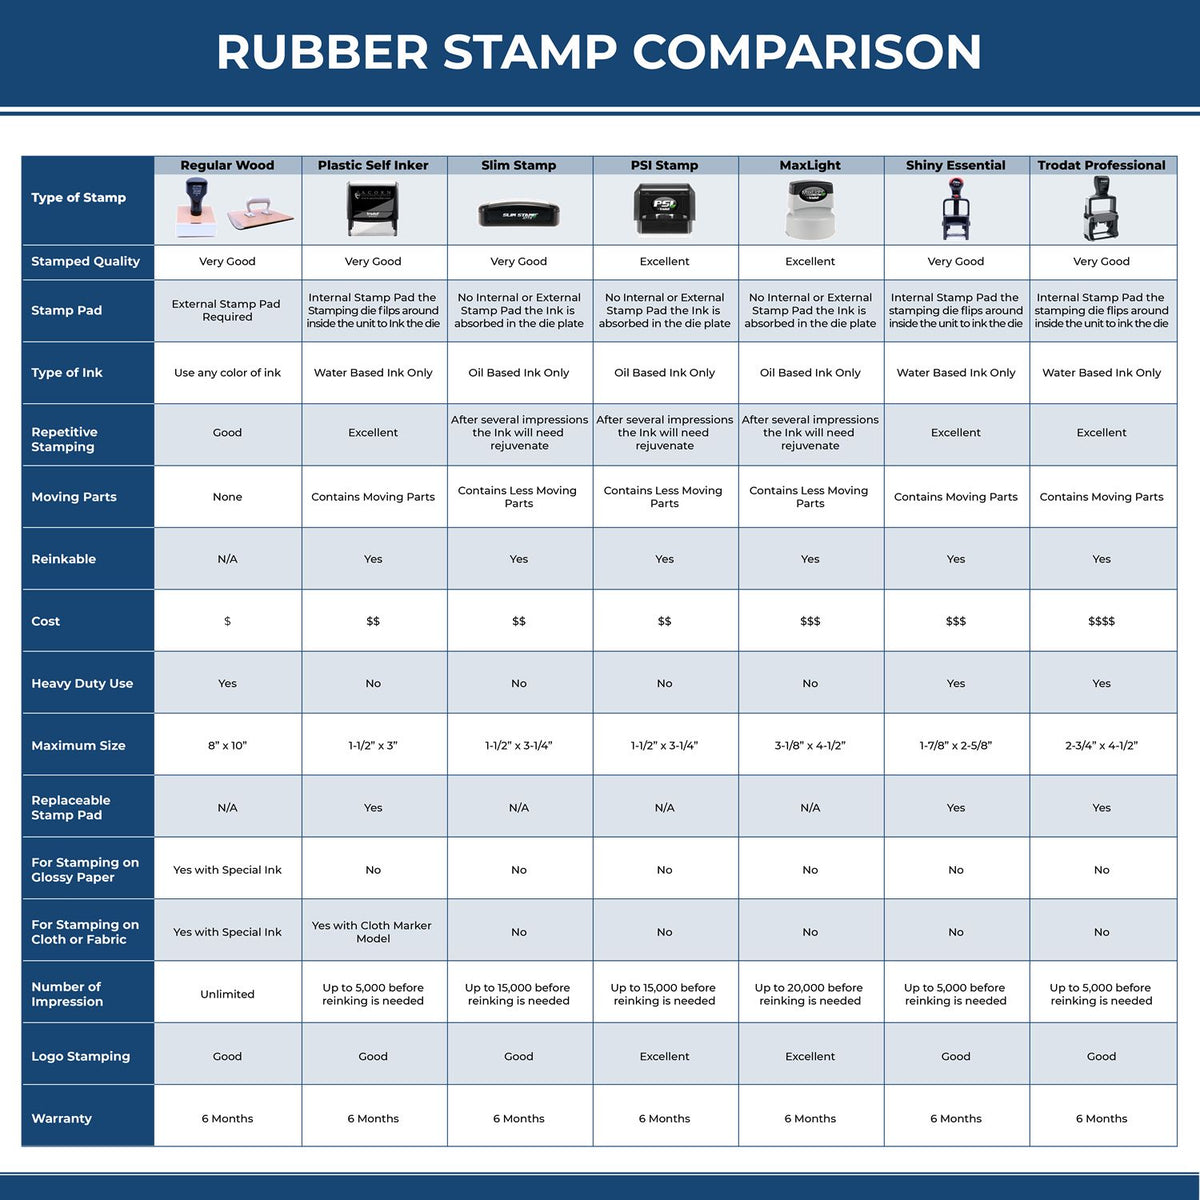 Large Self-Inking You Insurance has Paid their portion Stamp 5566S Rubber Stamp Comparison